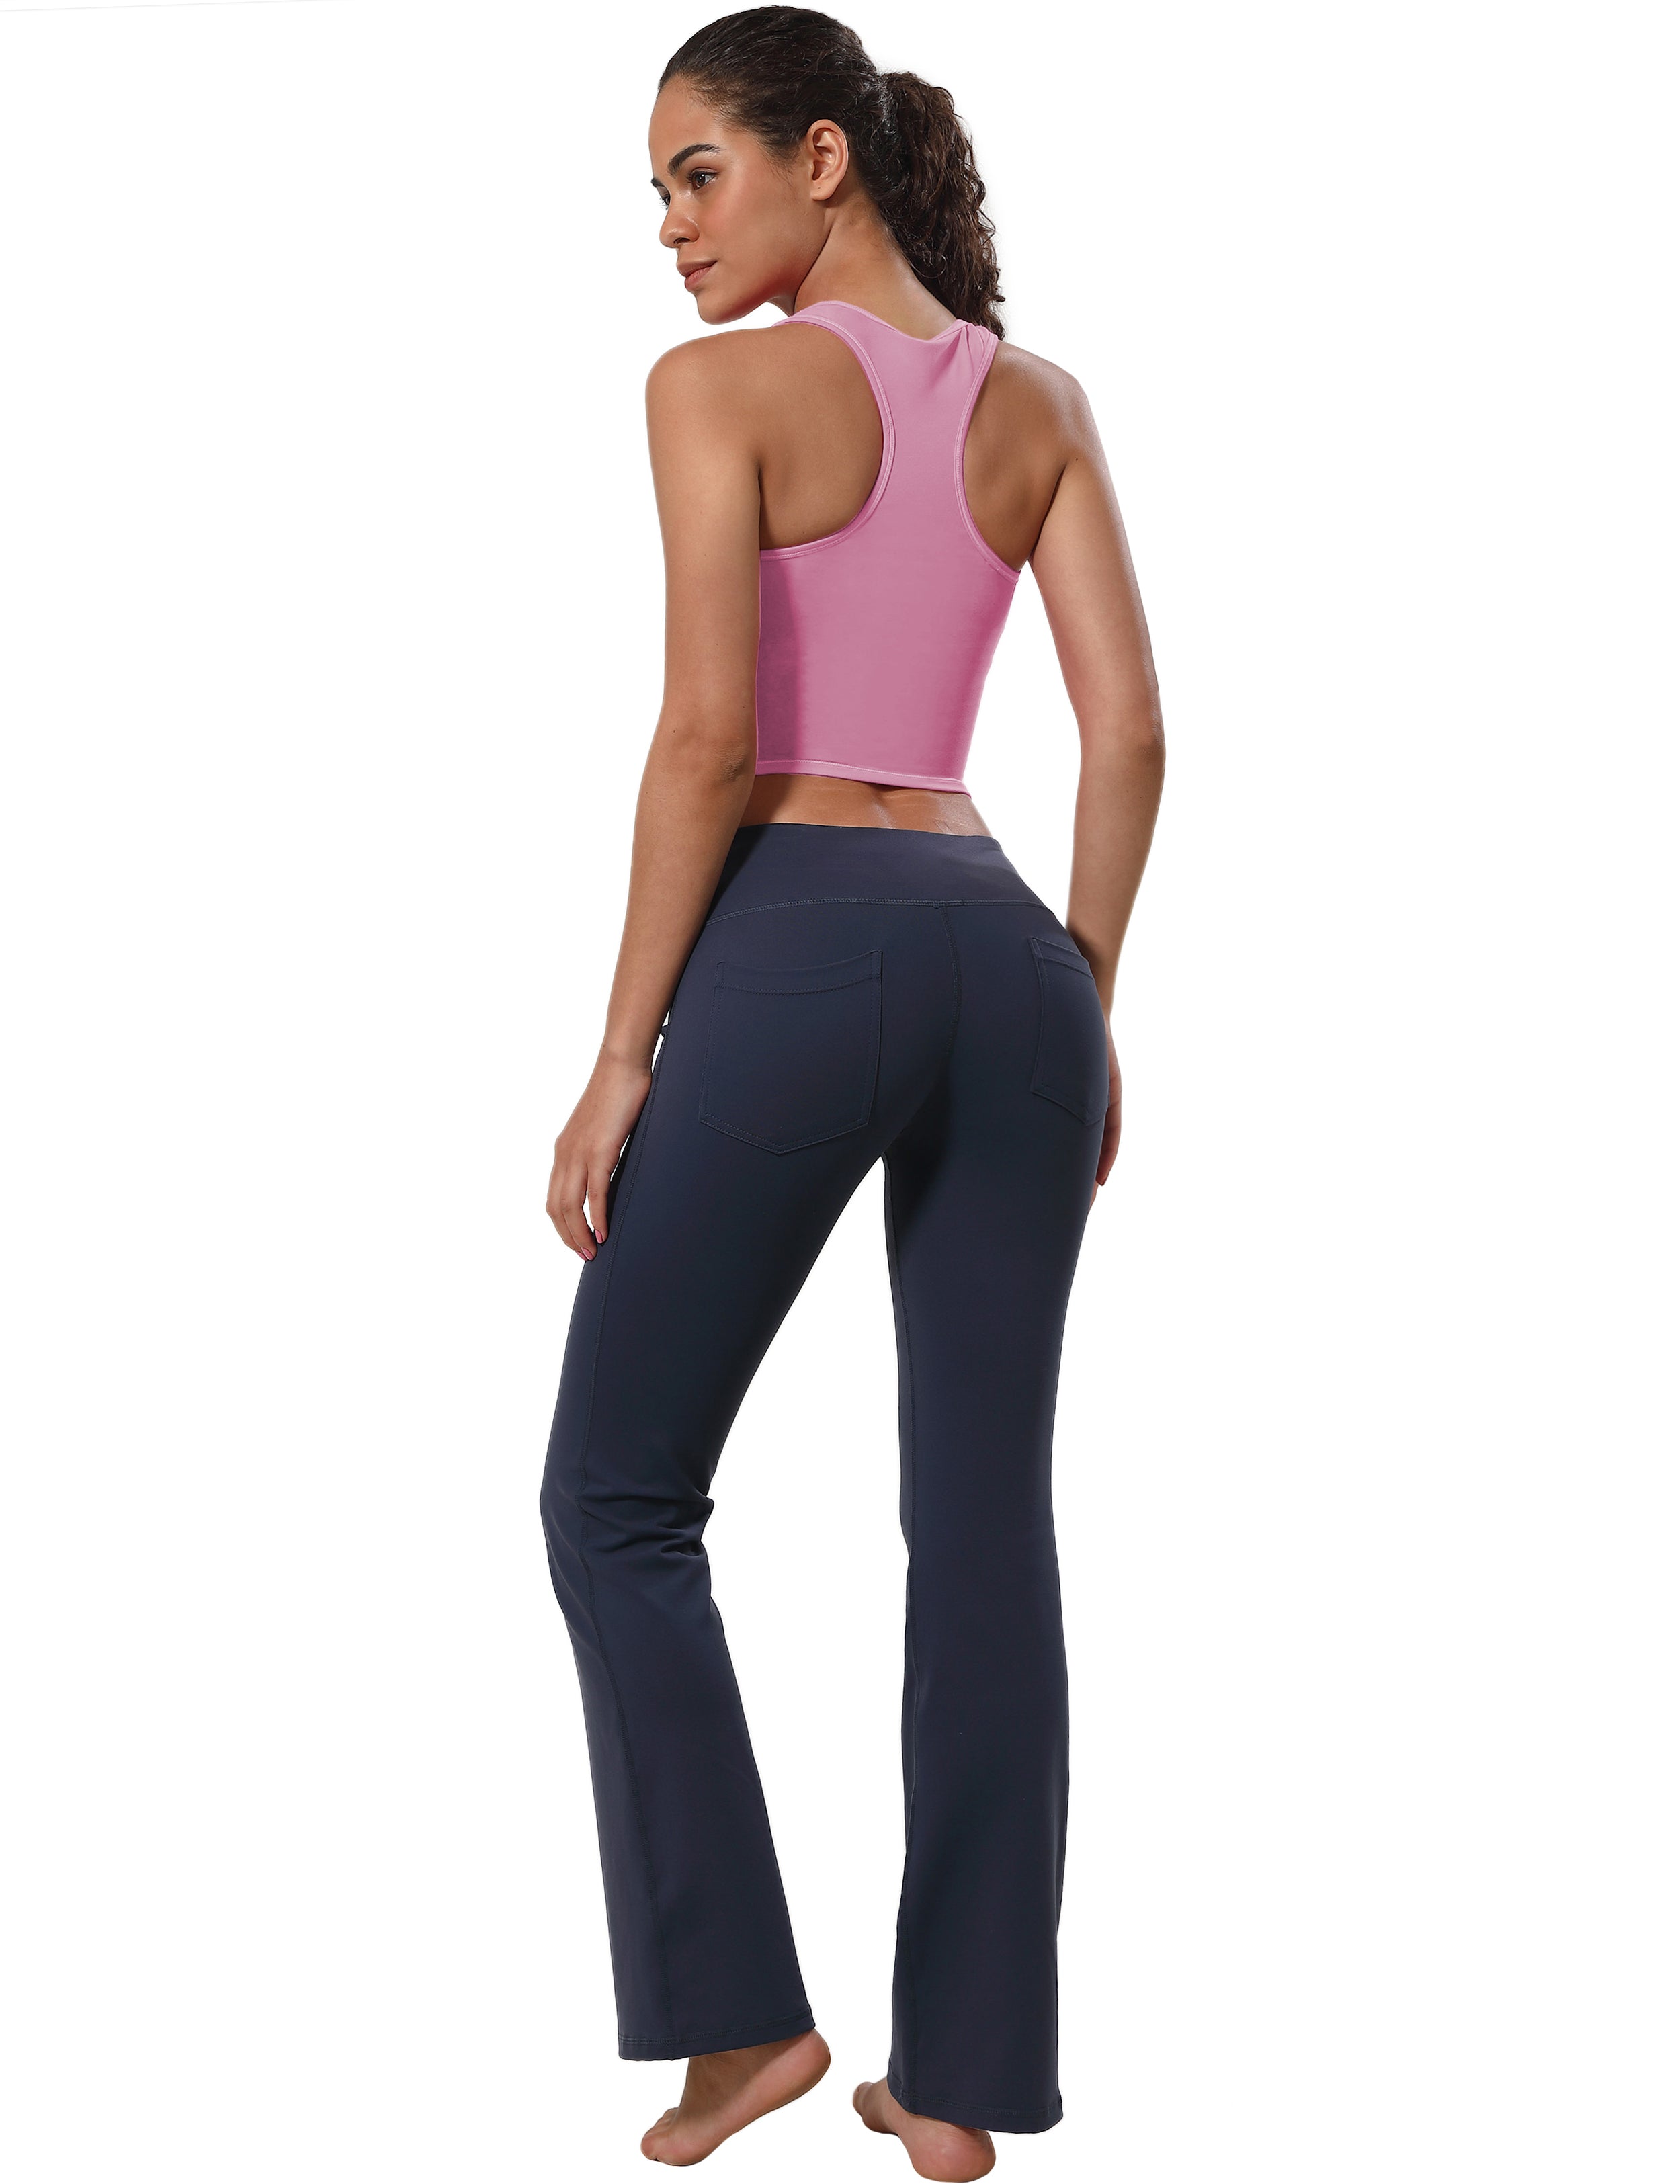 Racerback Athletic Crop Tank Tops lightpink 92%Nylon/8%Spandex(Cotton Soft) Designed for Yoga Tight Fit So buttery soft, it feels weightless Sweat-wicking Four-way stretch Breathable Contours your body Sits below the waistband for moderate, everyday coverage